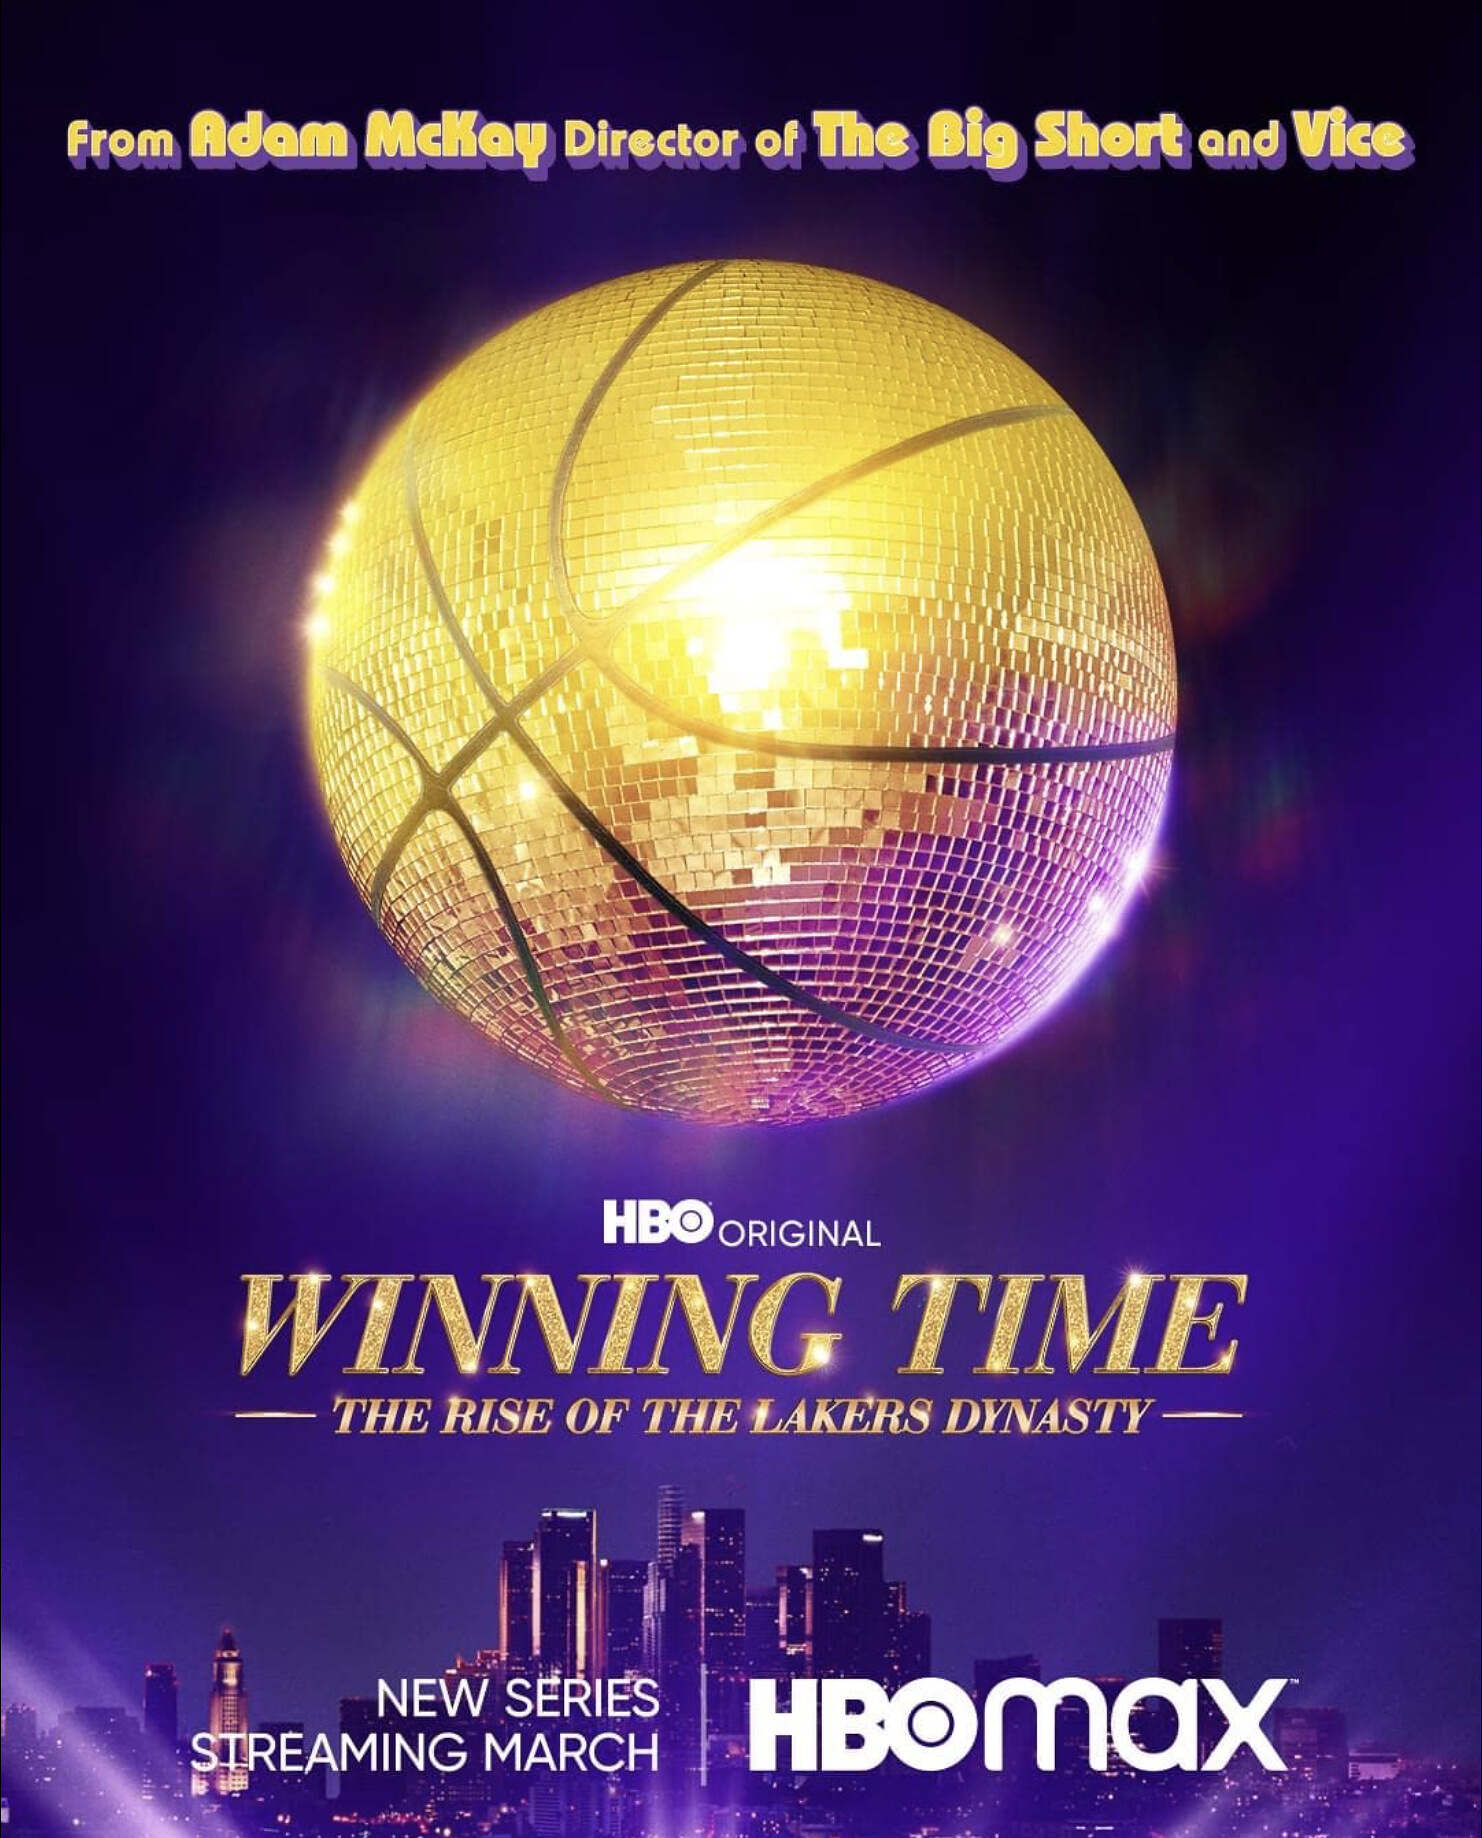 1st Trailer For HBO Original Series 'Winning Time: The Rise Of The Lakers Dynasty'